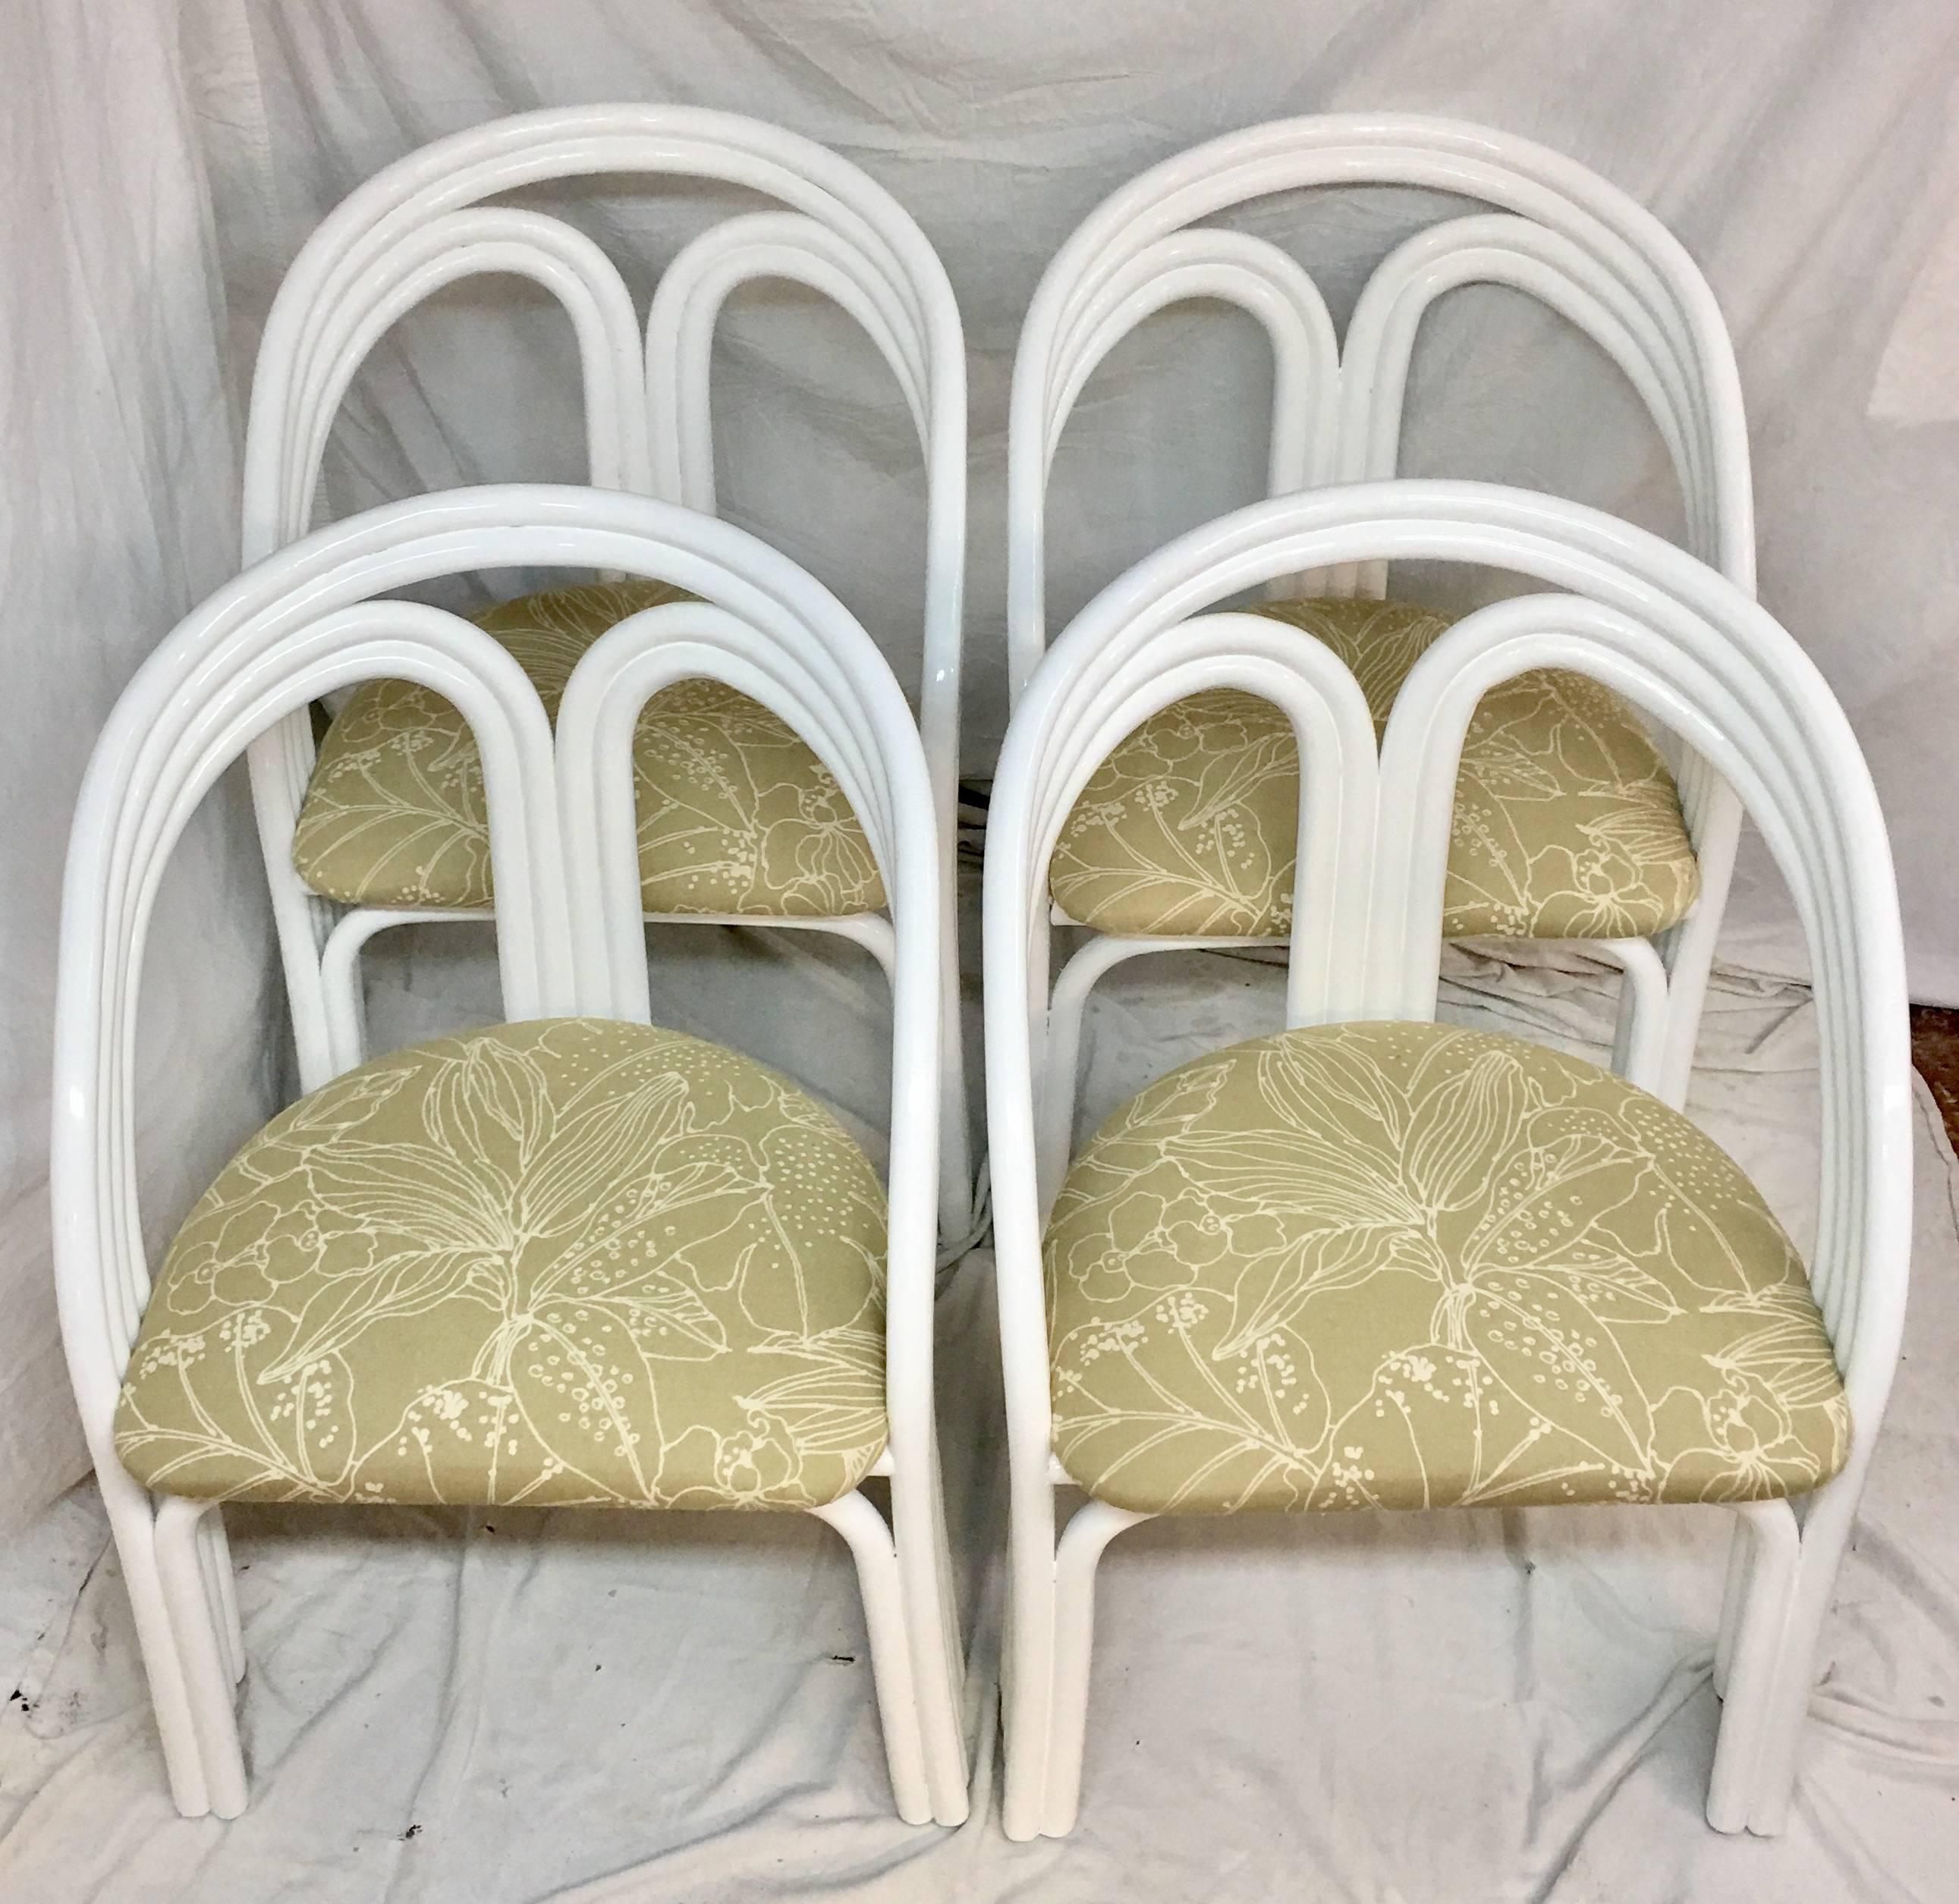 Mid-Century Art Deco set of four rattan reed upholstered chairs. Newly lacquered in white high gloss paint with khaki and white fern print cotton blend fabric.
Chairs are missing the manufacturing tag, most likely made by, Ficks Reed.